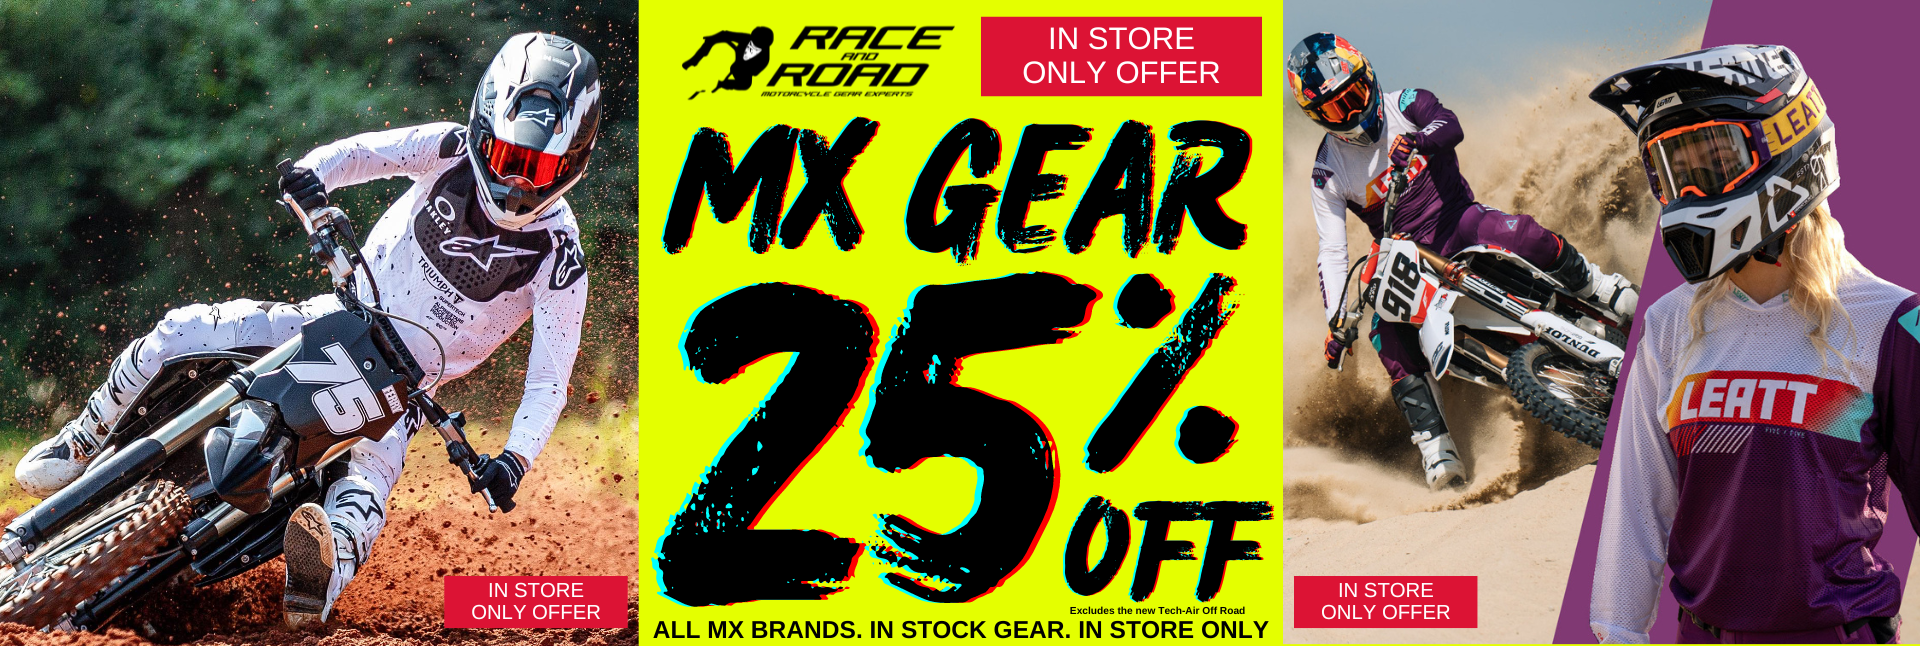 25% OFF ALL MX GEAR - IN STORE ONLY